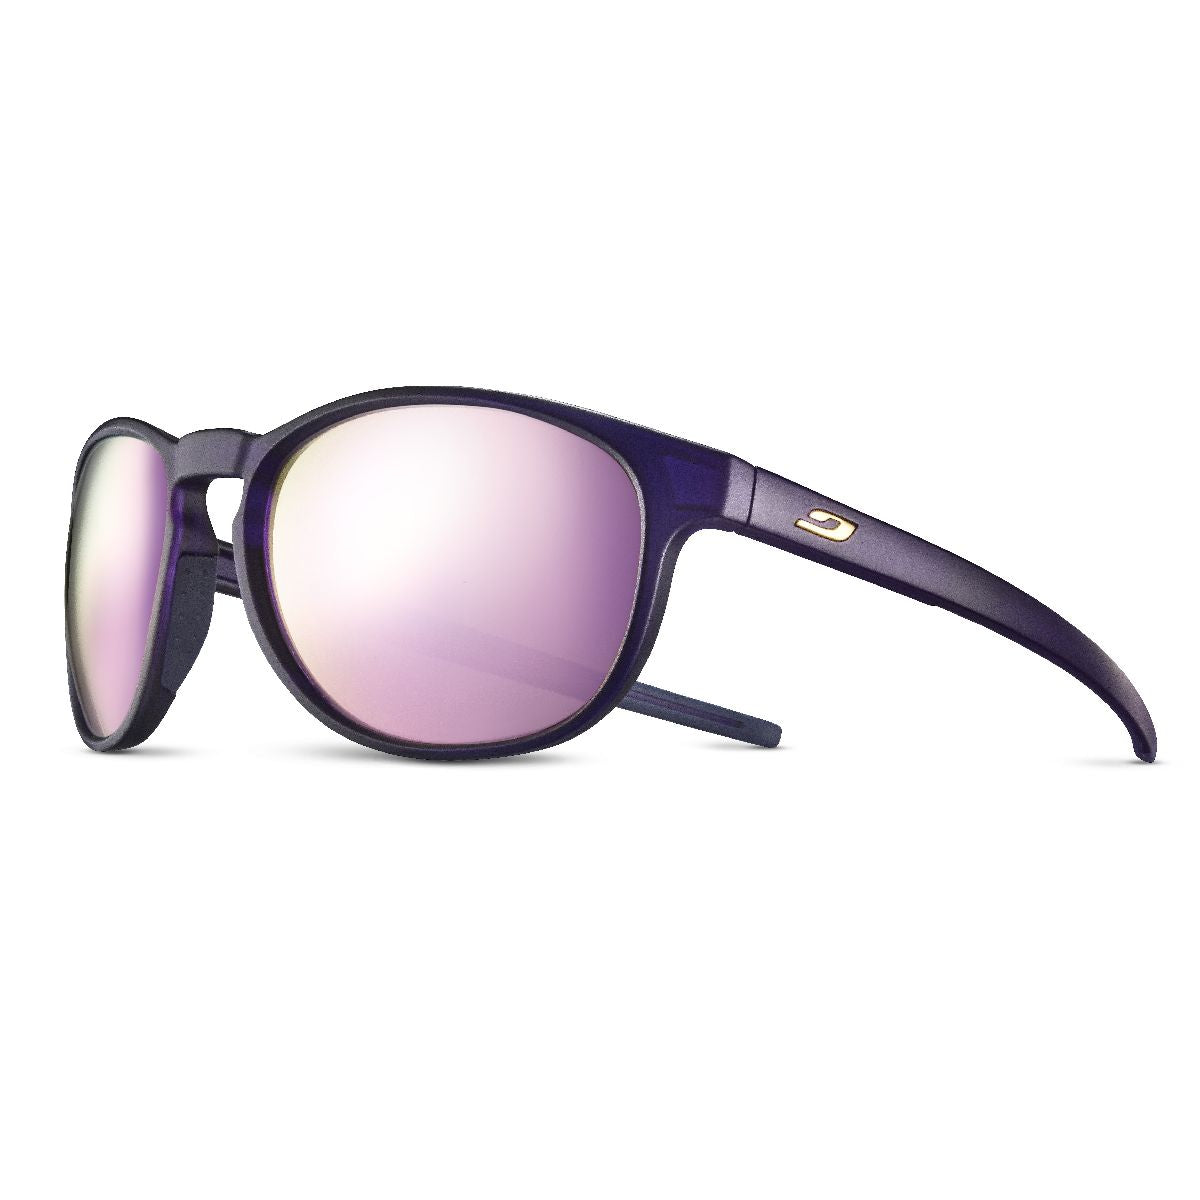 JULBO SOLAIRES SPECTRON 3CF 1126 TRANSLU VIOLET SPECT 55-18-130 FAST & LIGHT "Exclusive soft-comfort material on the temples that doesn't stick to hair, giving perfect grip and comfort "